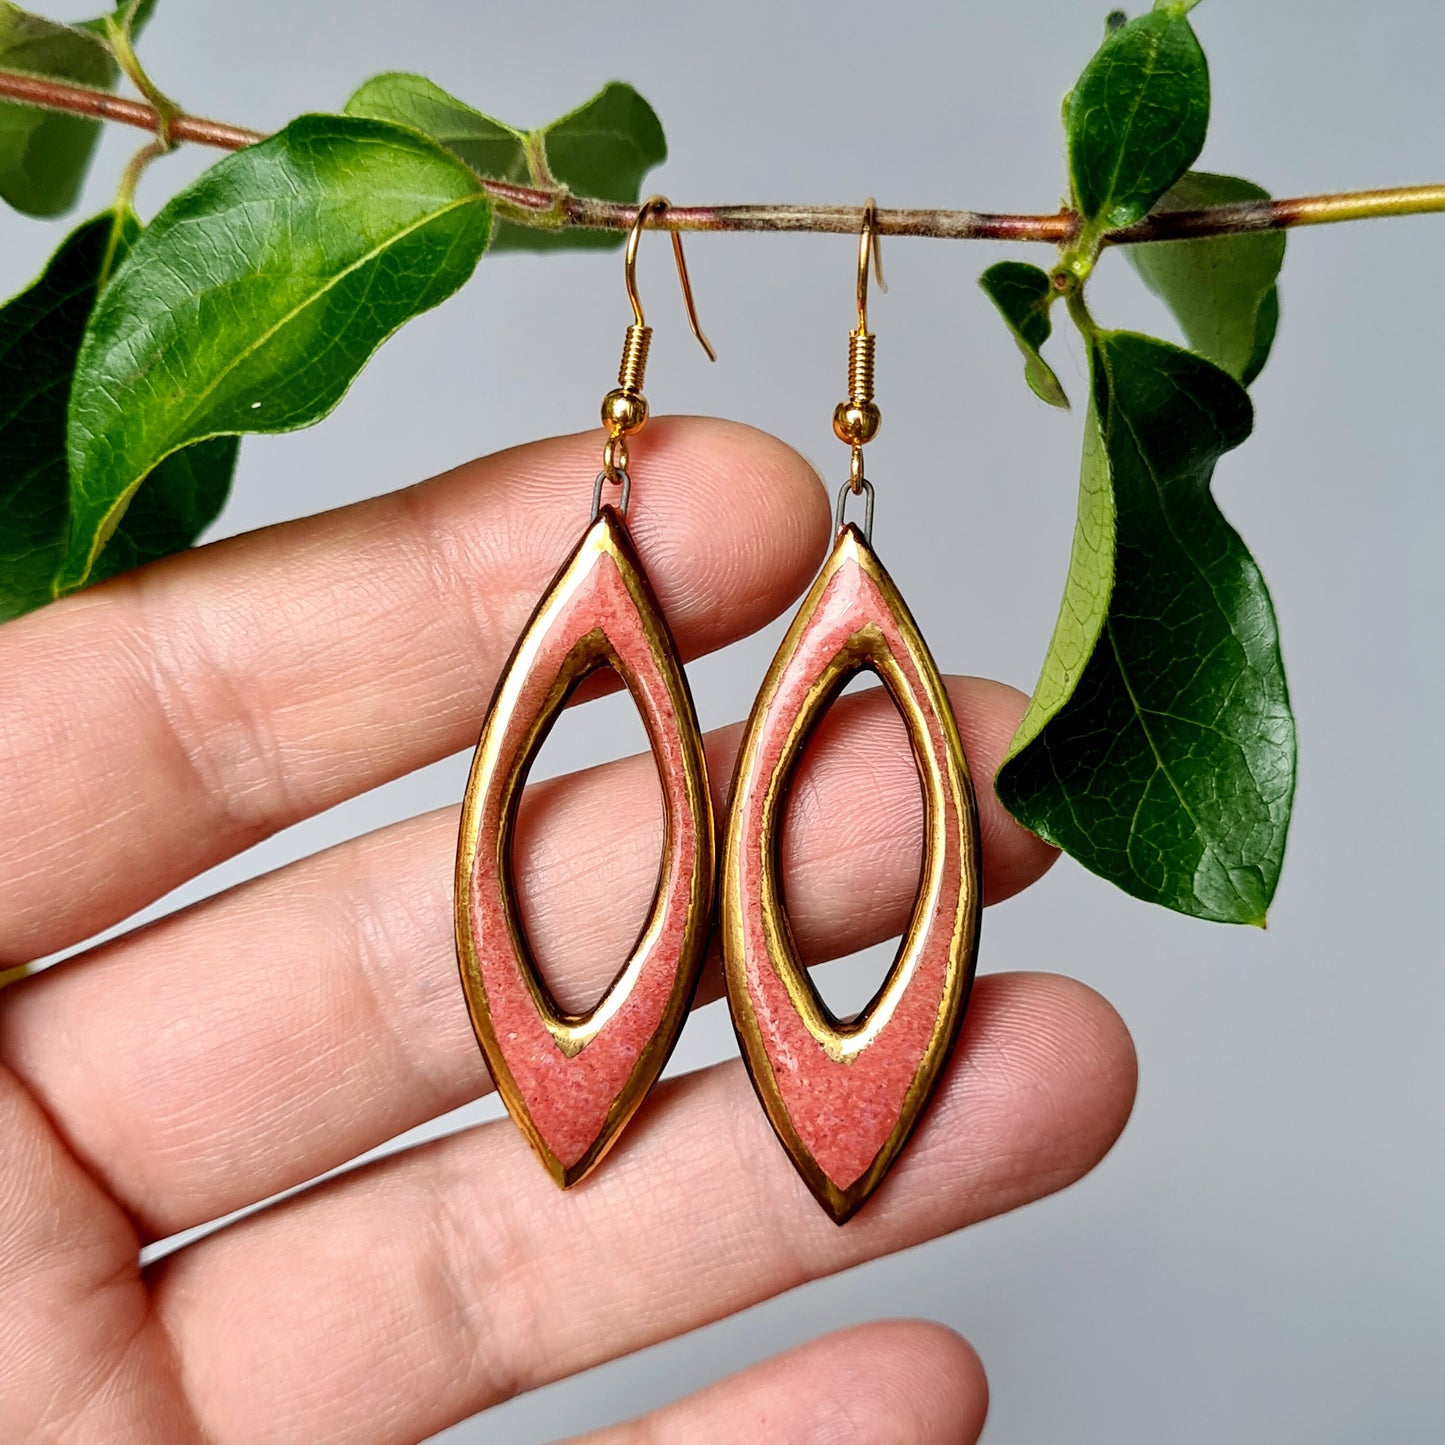 Handmade ceramic earrings with 24c gold (salmon pink)